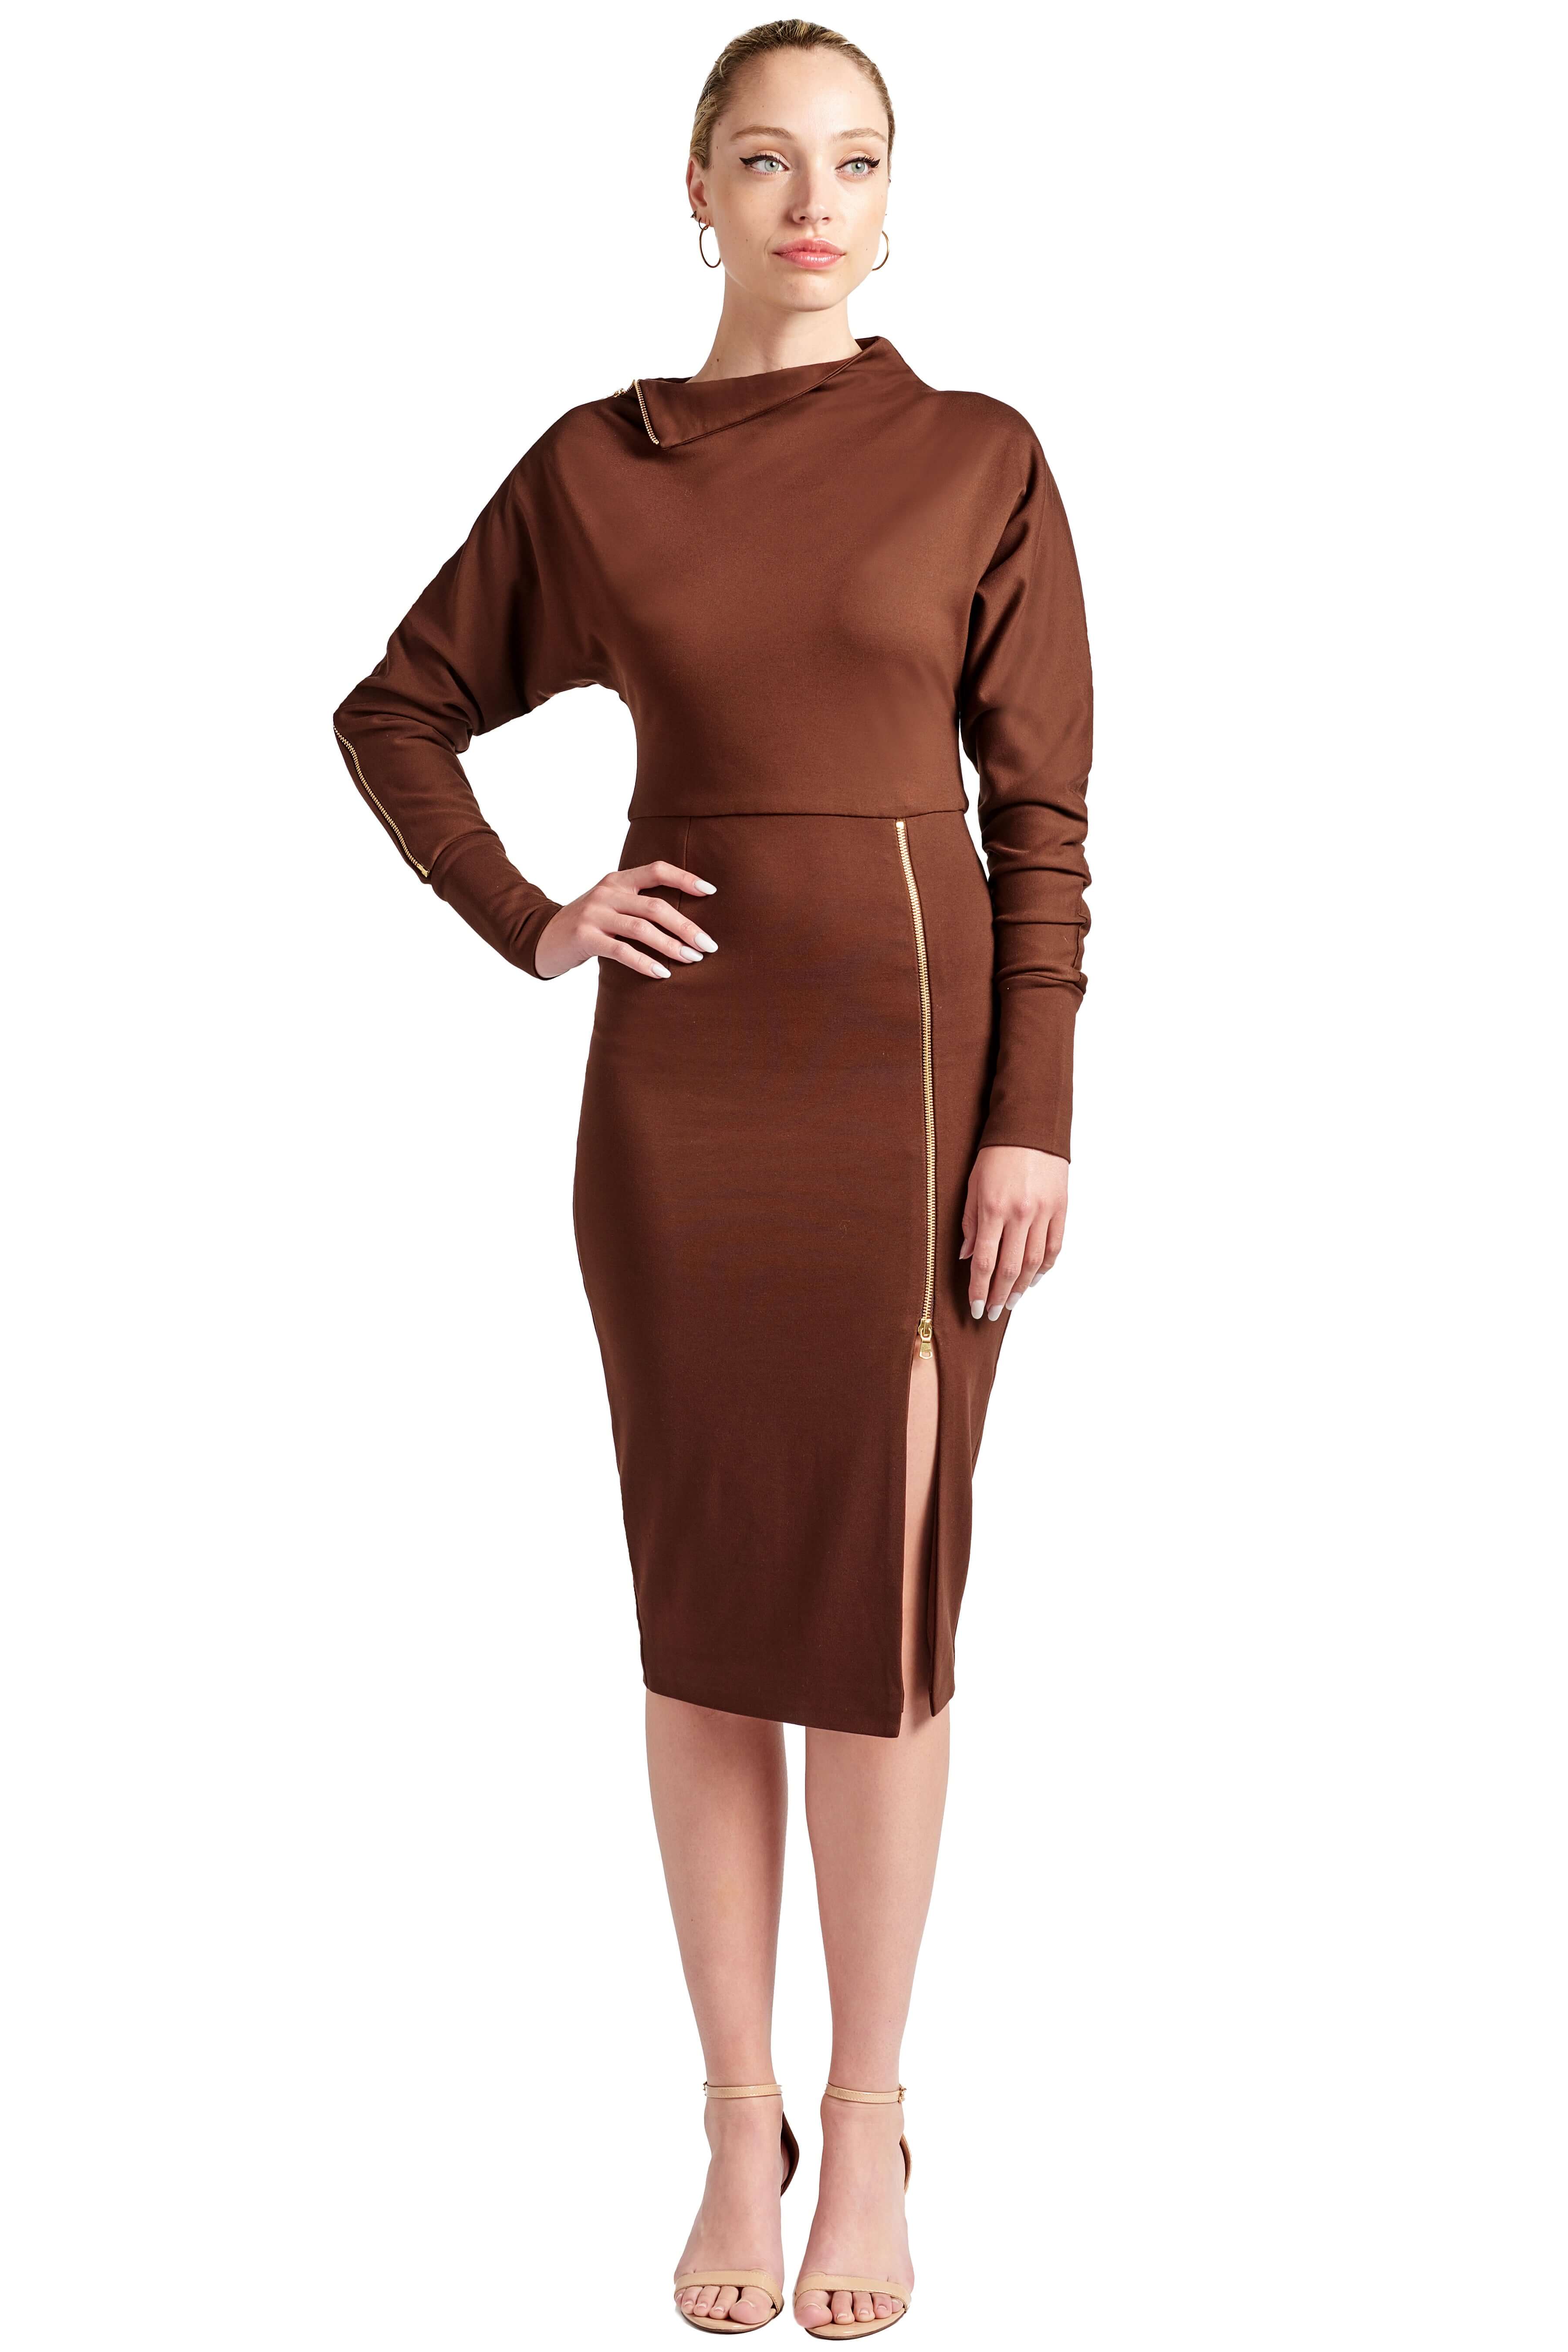 Front view of model wearing the Simona Maghen Josefa Dress, chocolate brown long sleeve Ponte midi dress with zipper along the right shoulder and front skirt zipper slit.